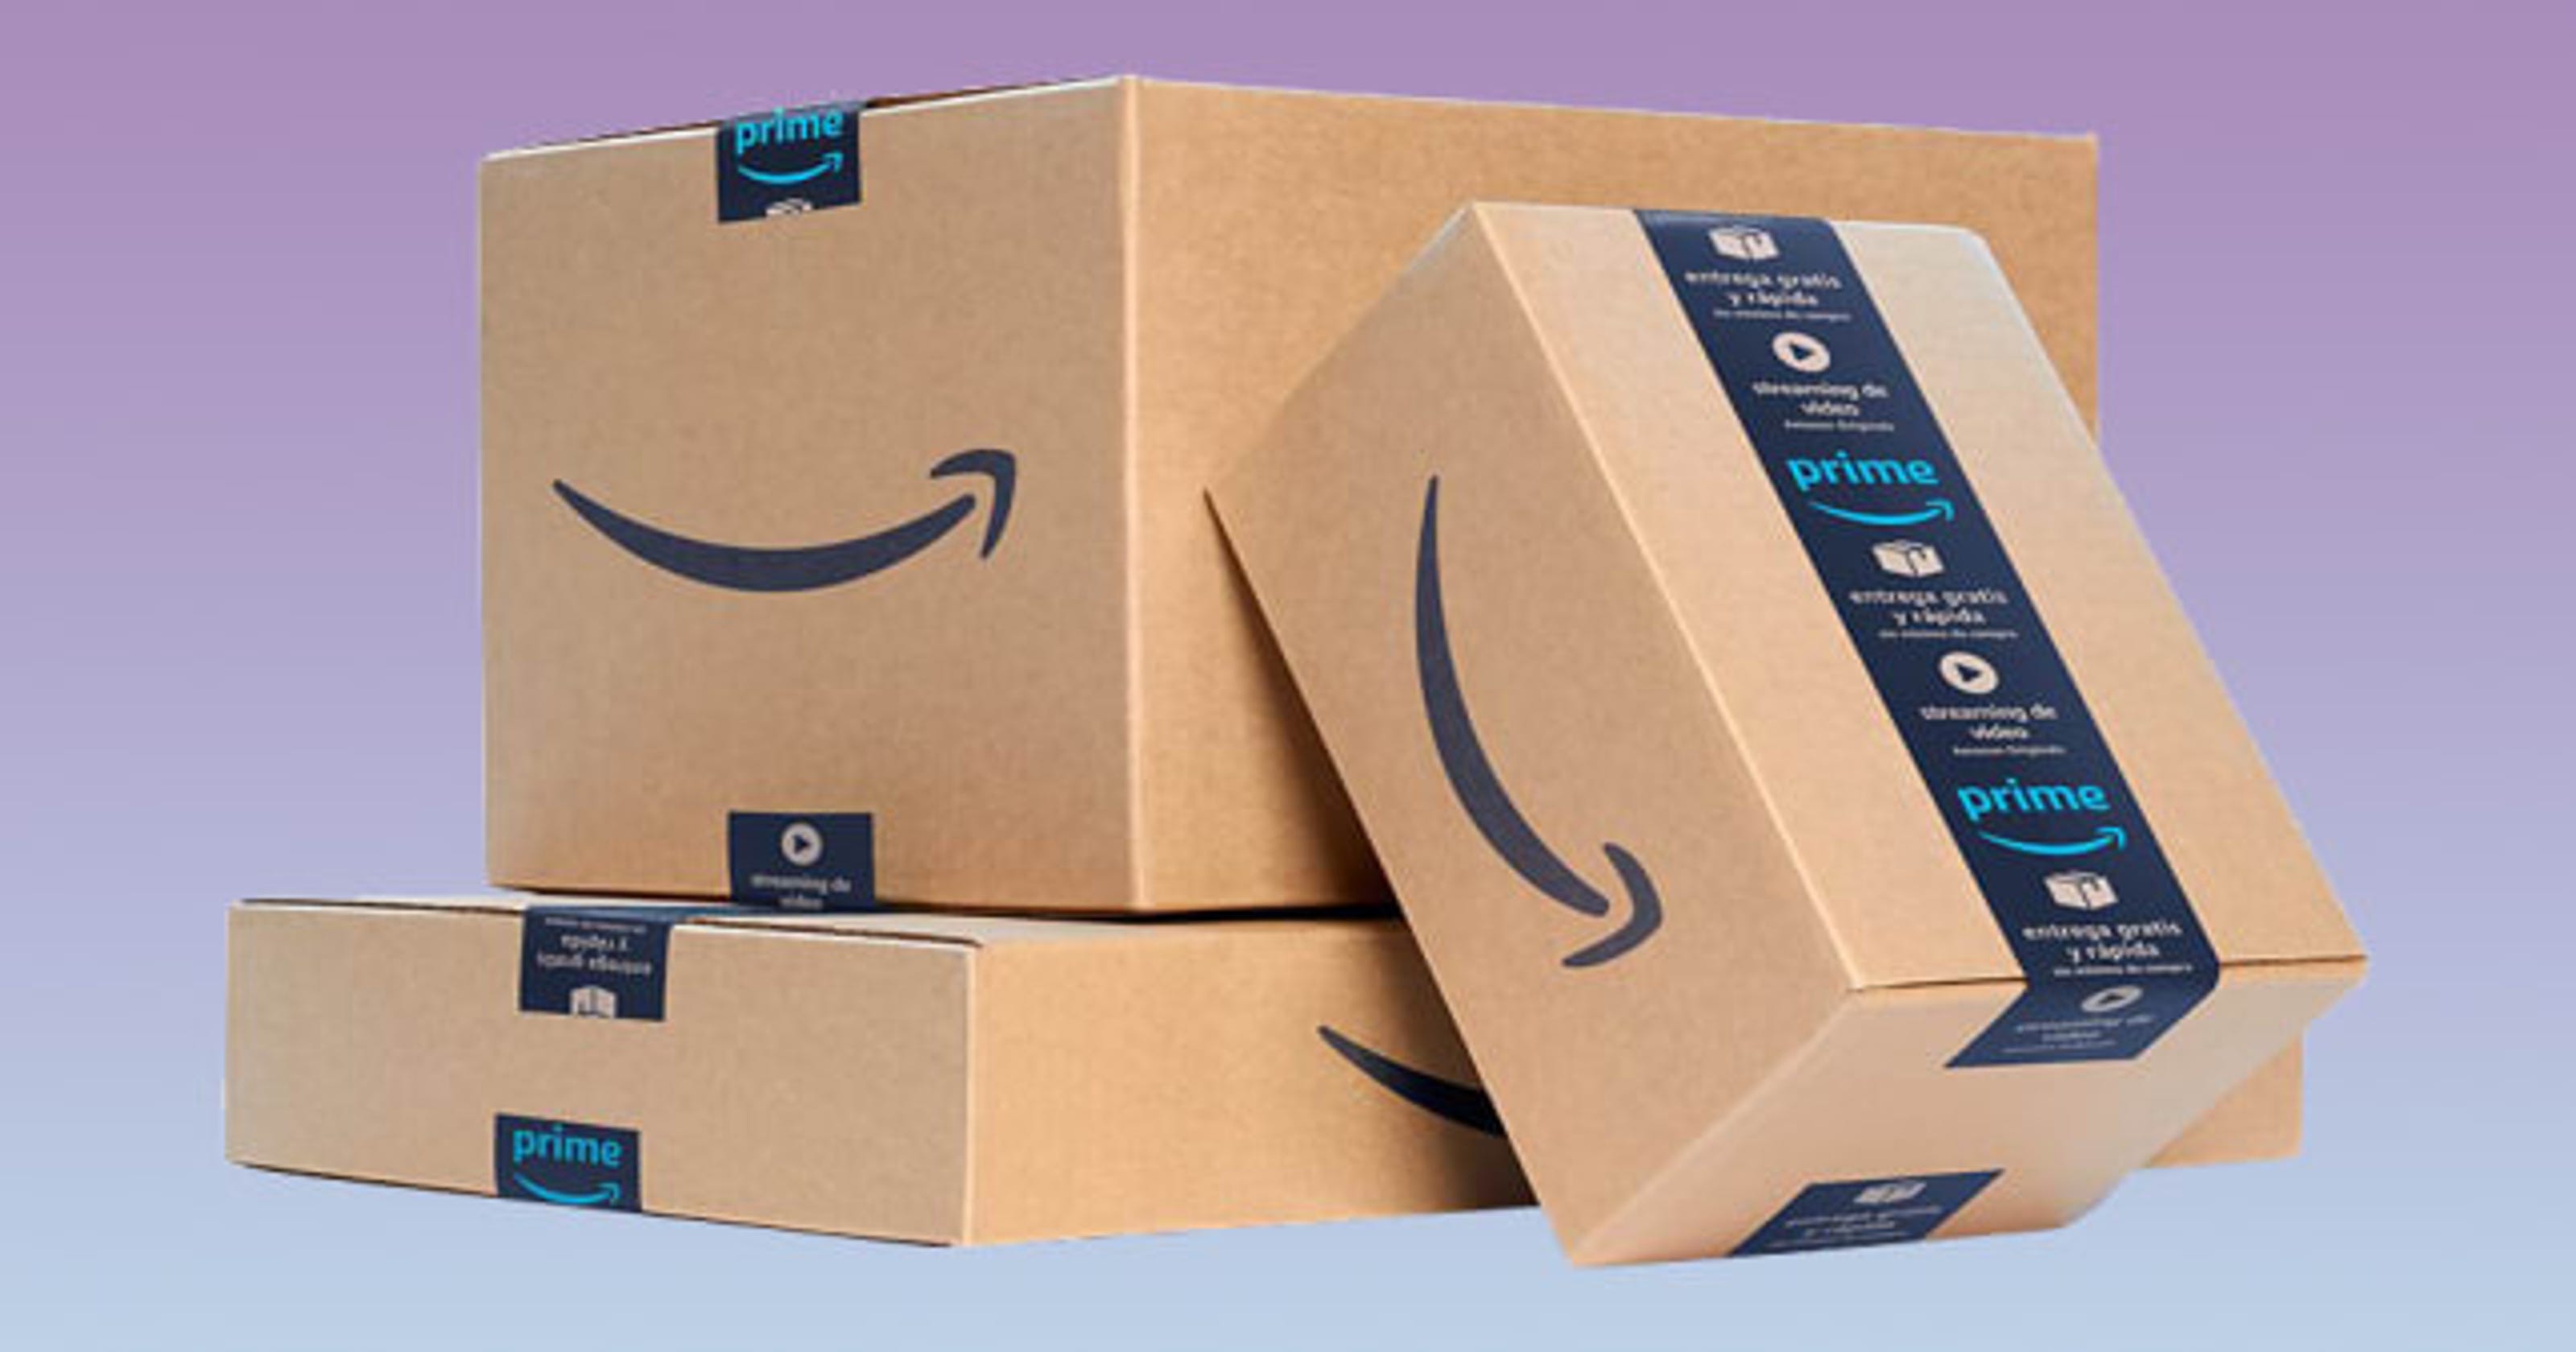 Amazon deals How to use Warehouse, Outlet as well as coupons to save